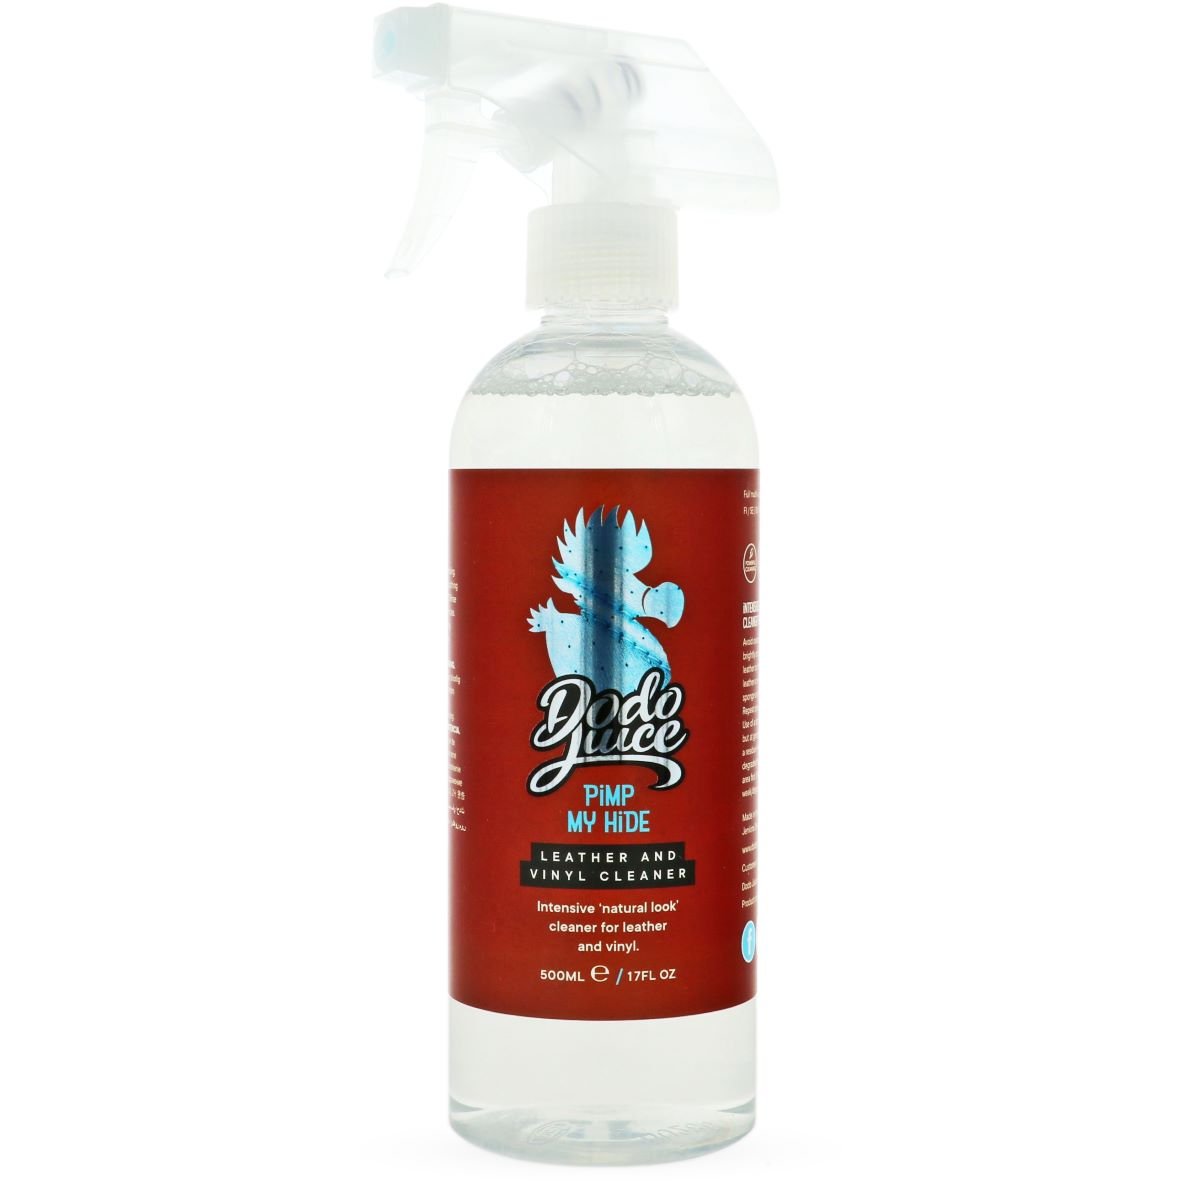 Pimp My Hide Leather and Vinyl Cleaner - 500ml